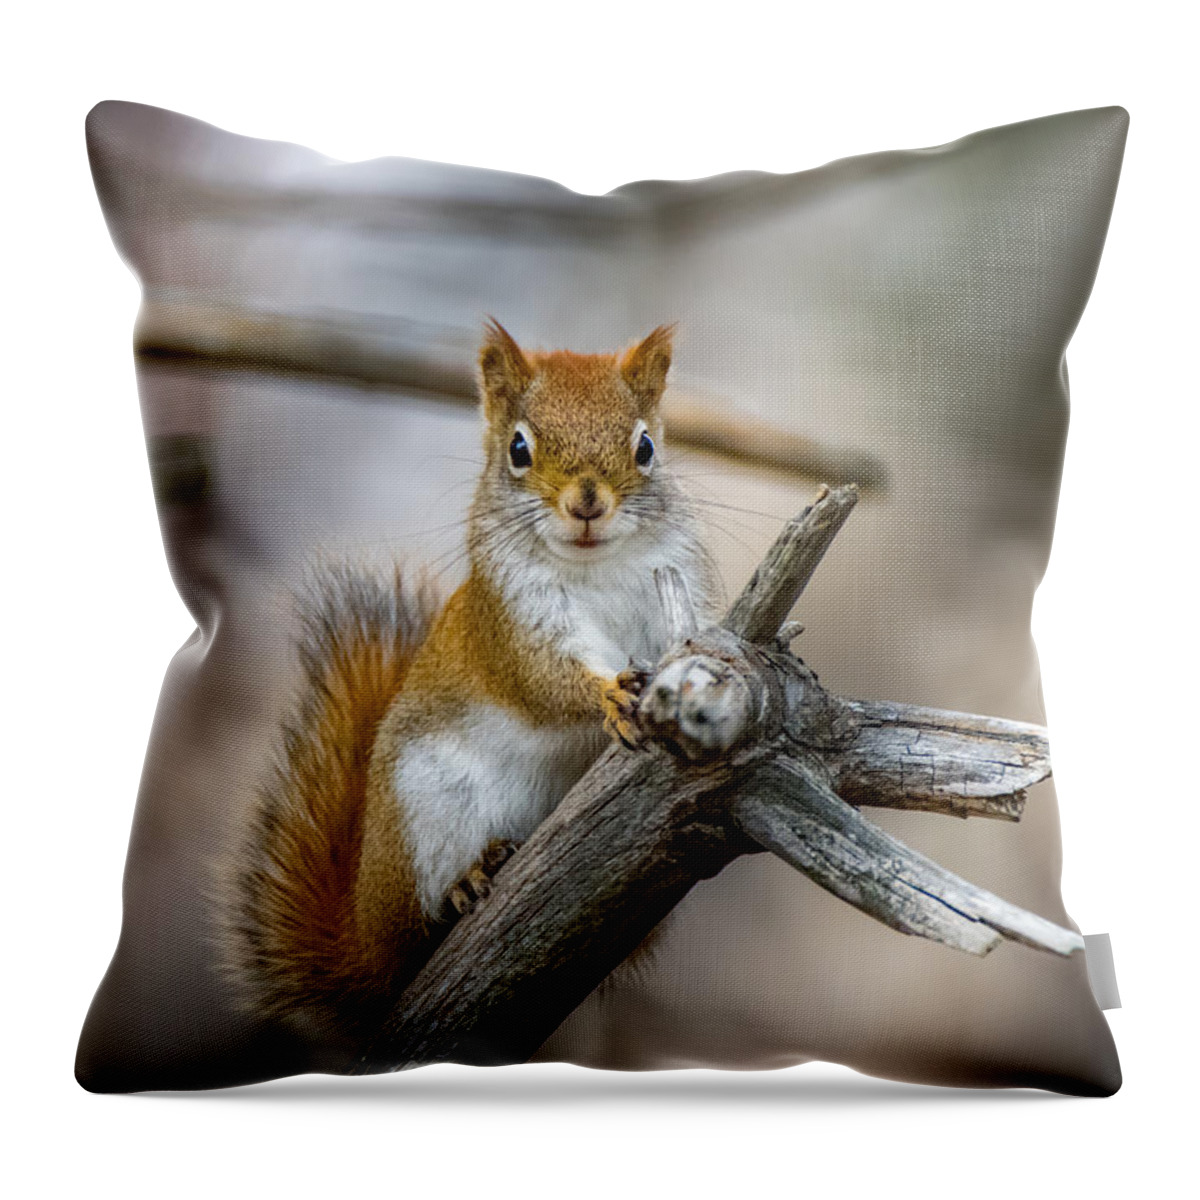 Squirrel Throw Pillow featuring the photograph The Look by Bob Orsillo